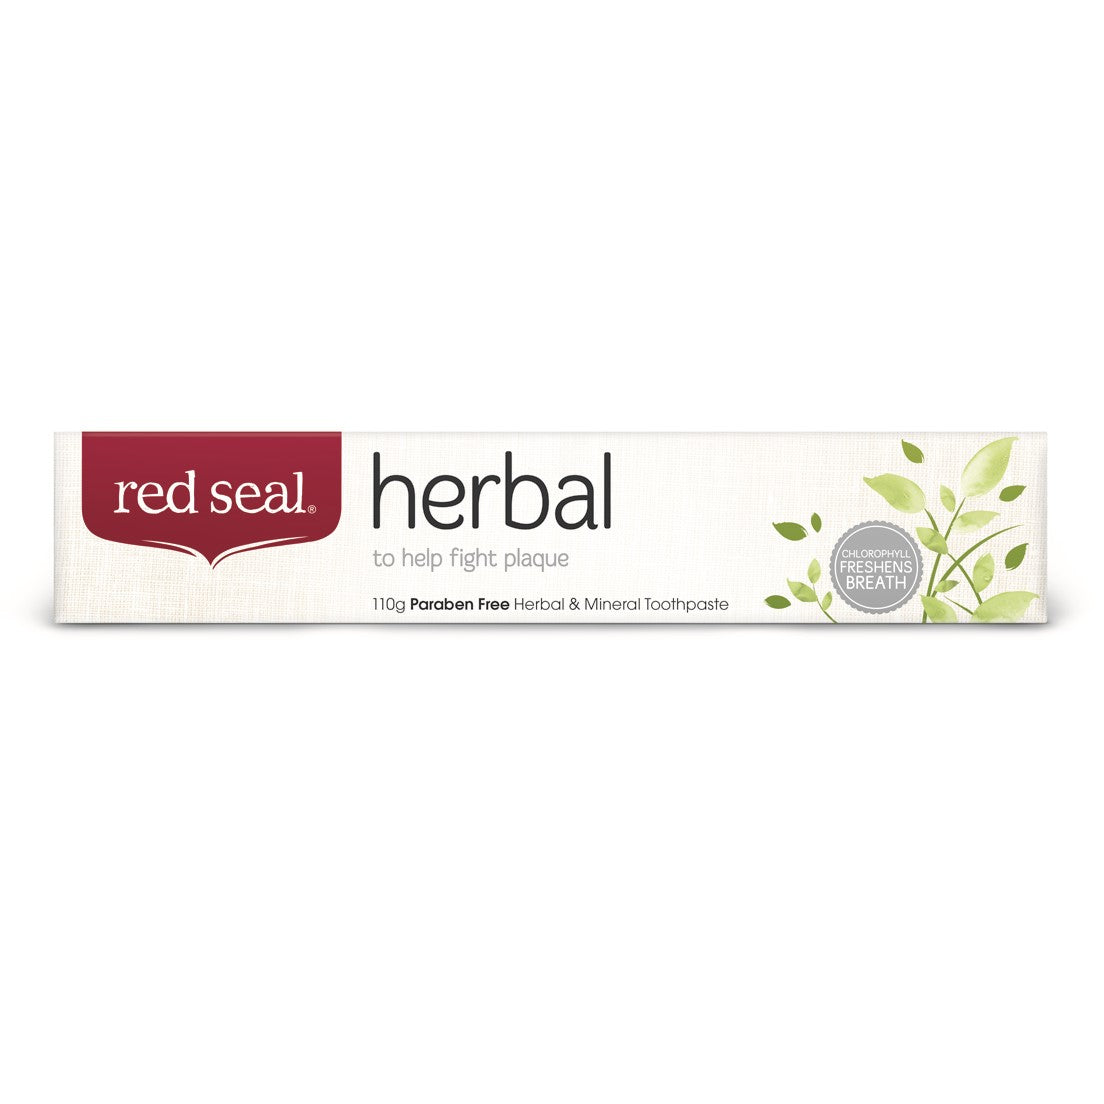 Red Seal Toothpaste 110g, Herbal Formula To Help Fight Plaque